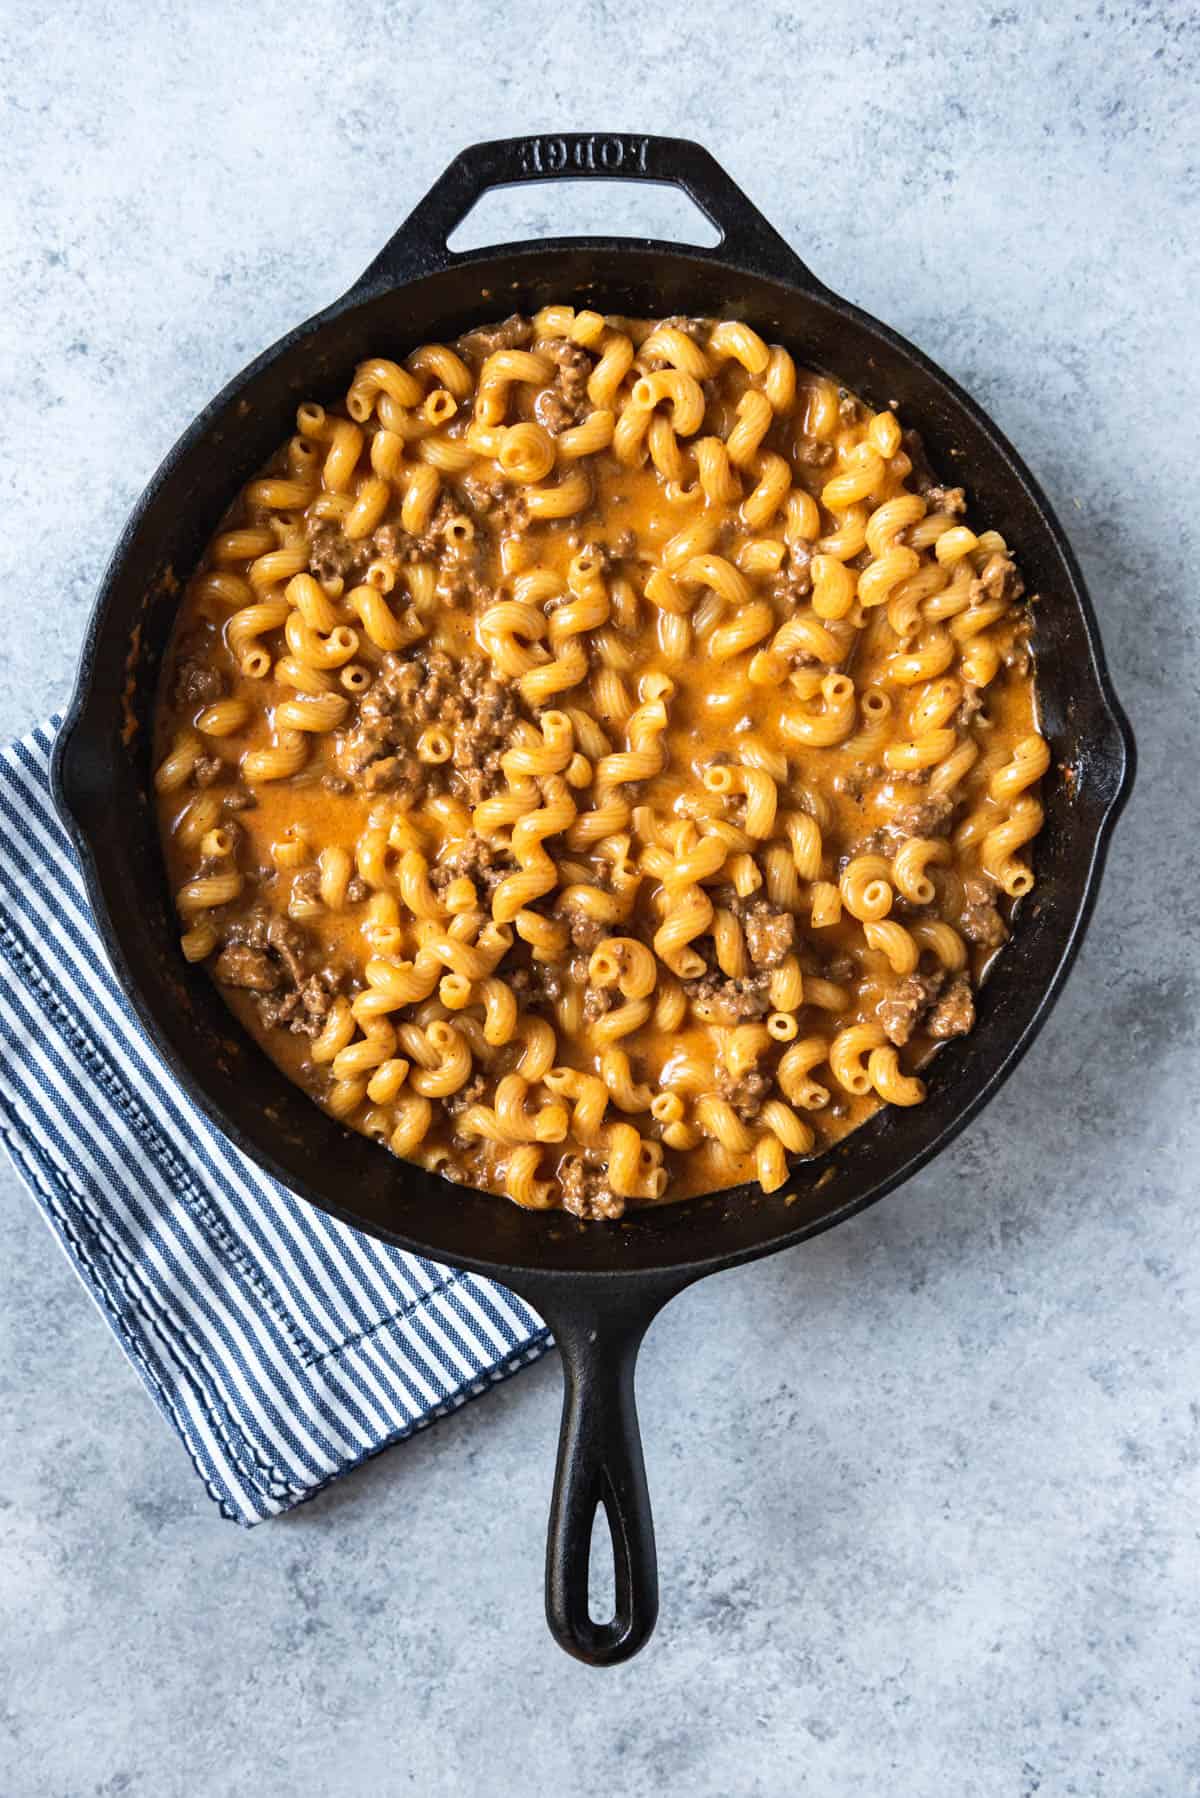 An image of cheesy pasta noodles and ground beef with spices in a pan.